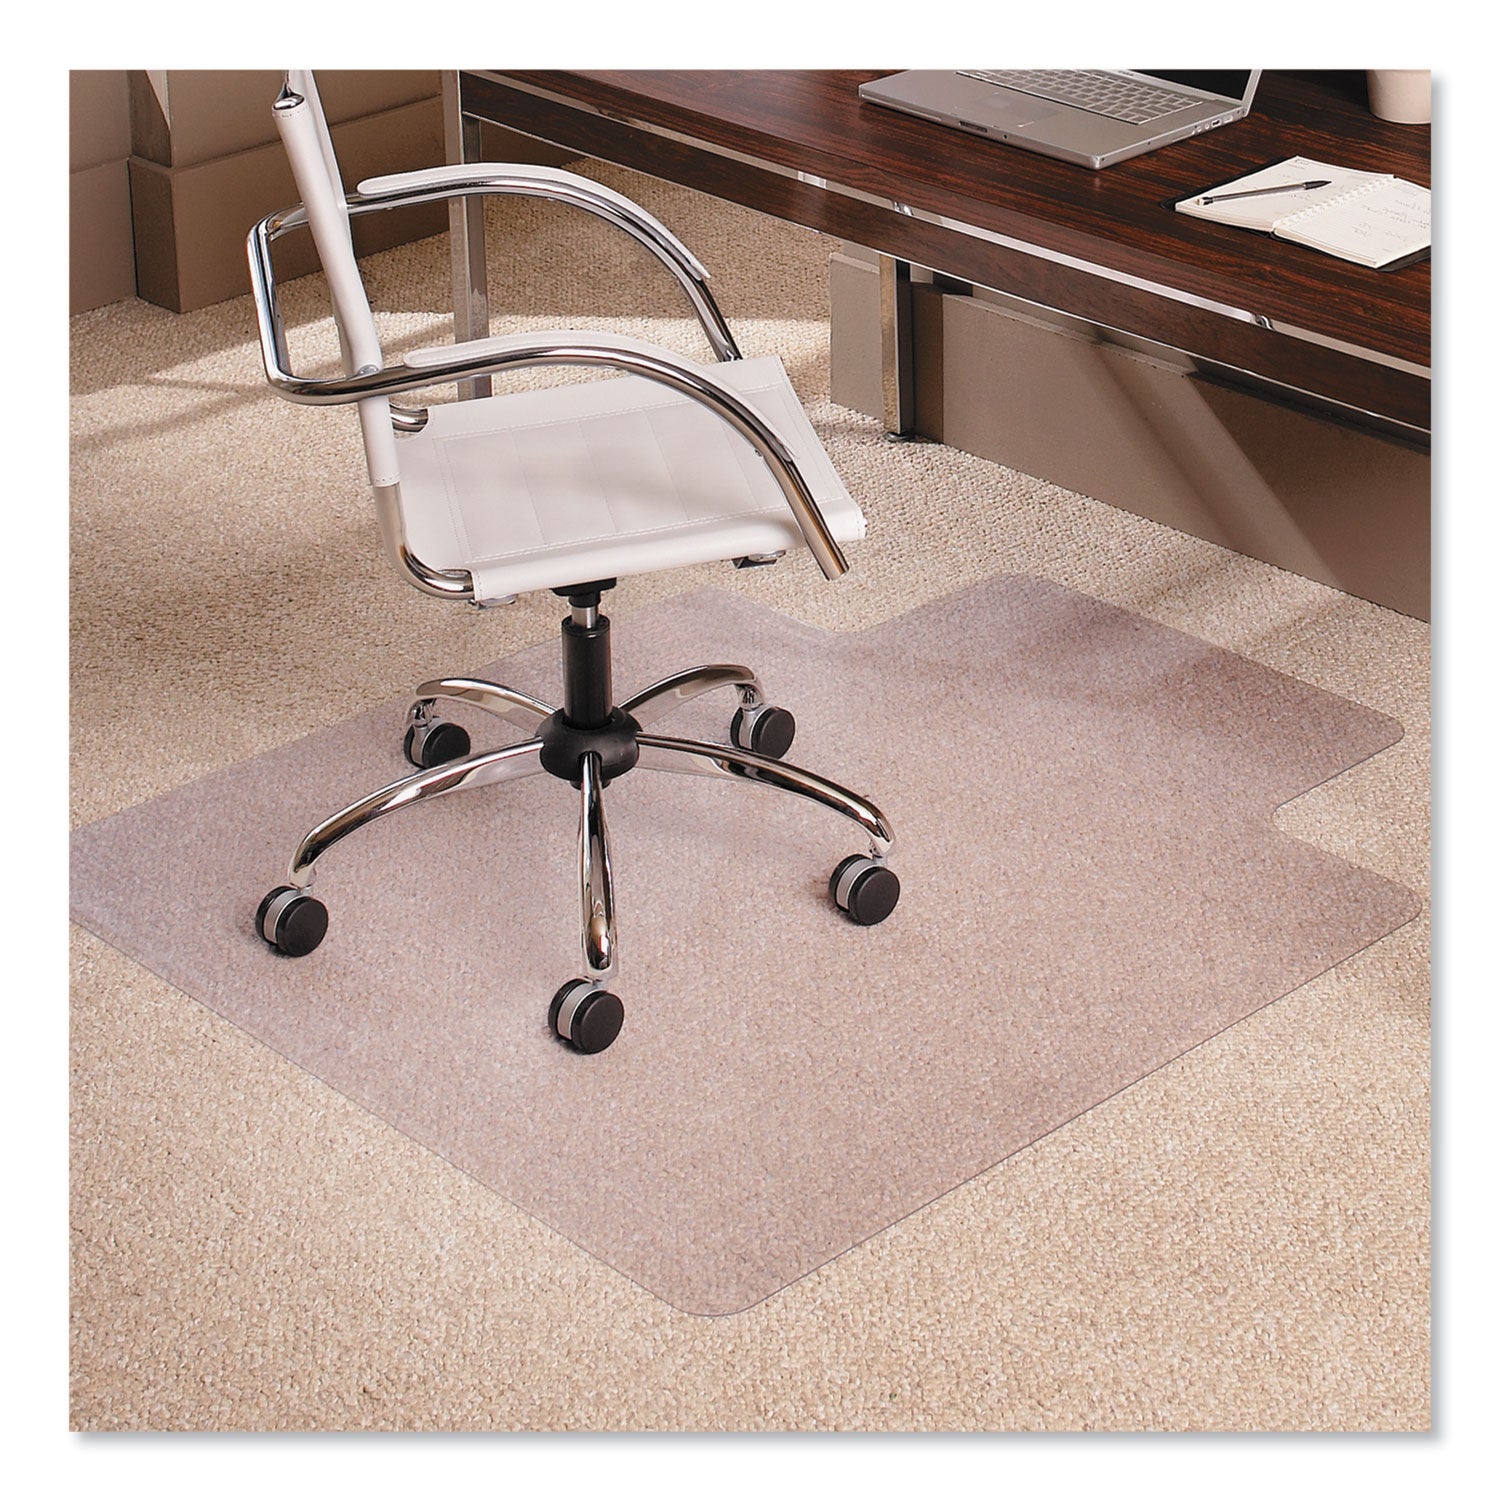 EverLife Moderate Use Chair Mat for Low Pile Carpet, Rectangular with Lip, 45 x 53, Clear - 